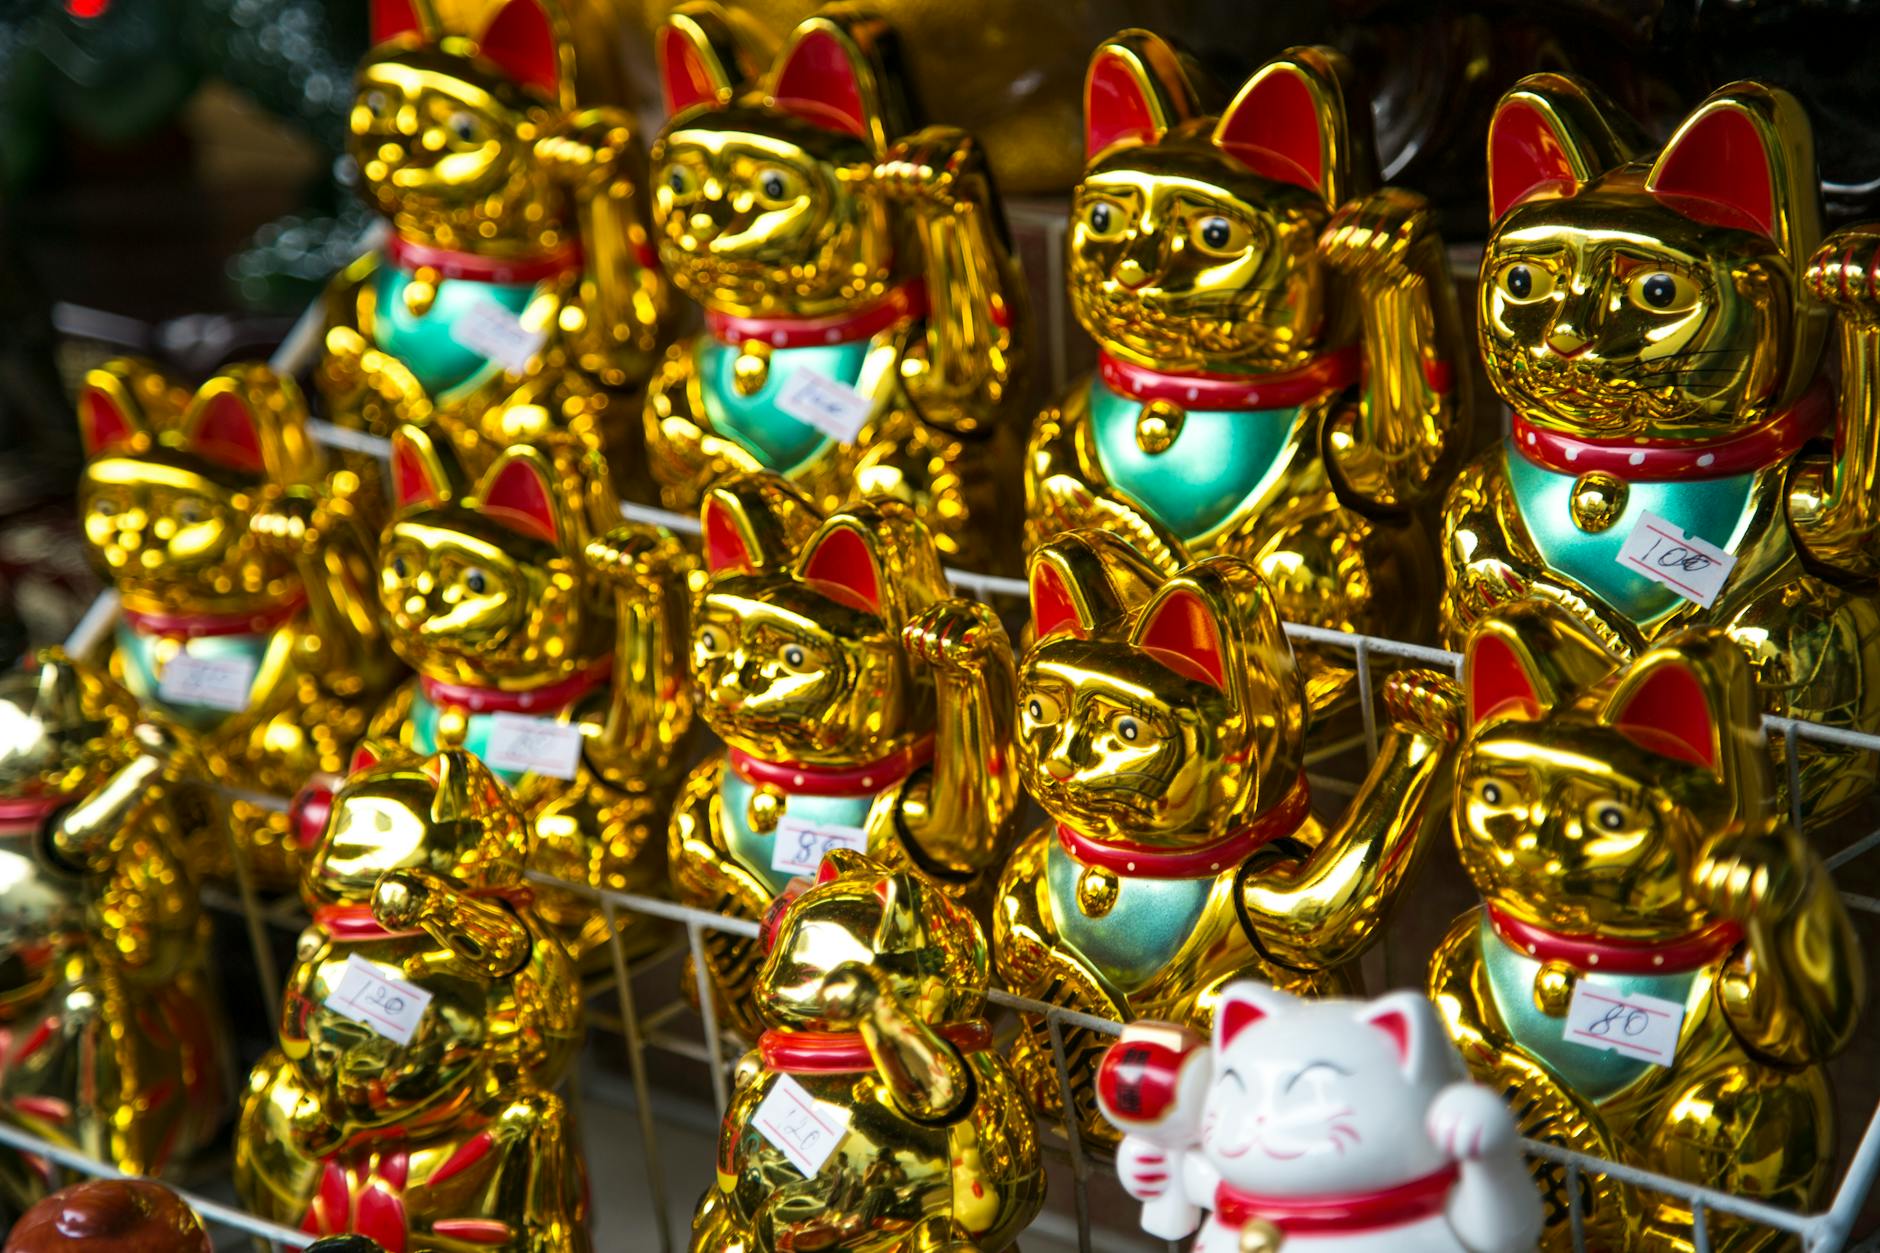 A Figurine Image of a Golden Cat for Sale